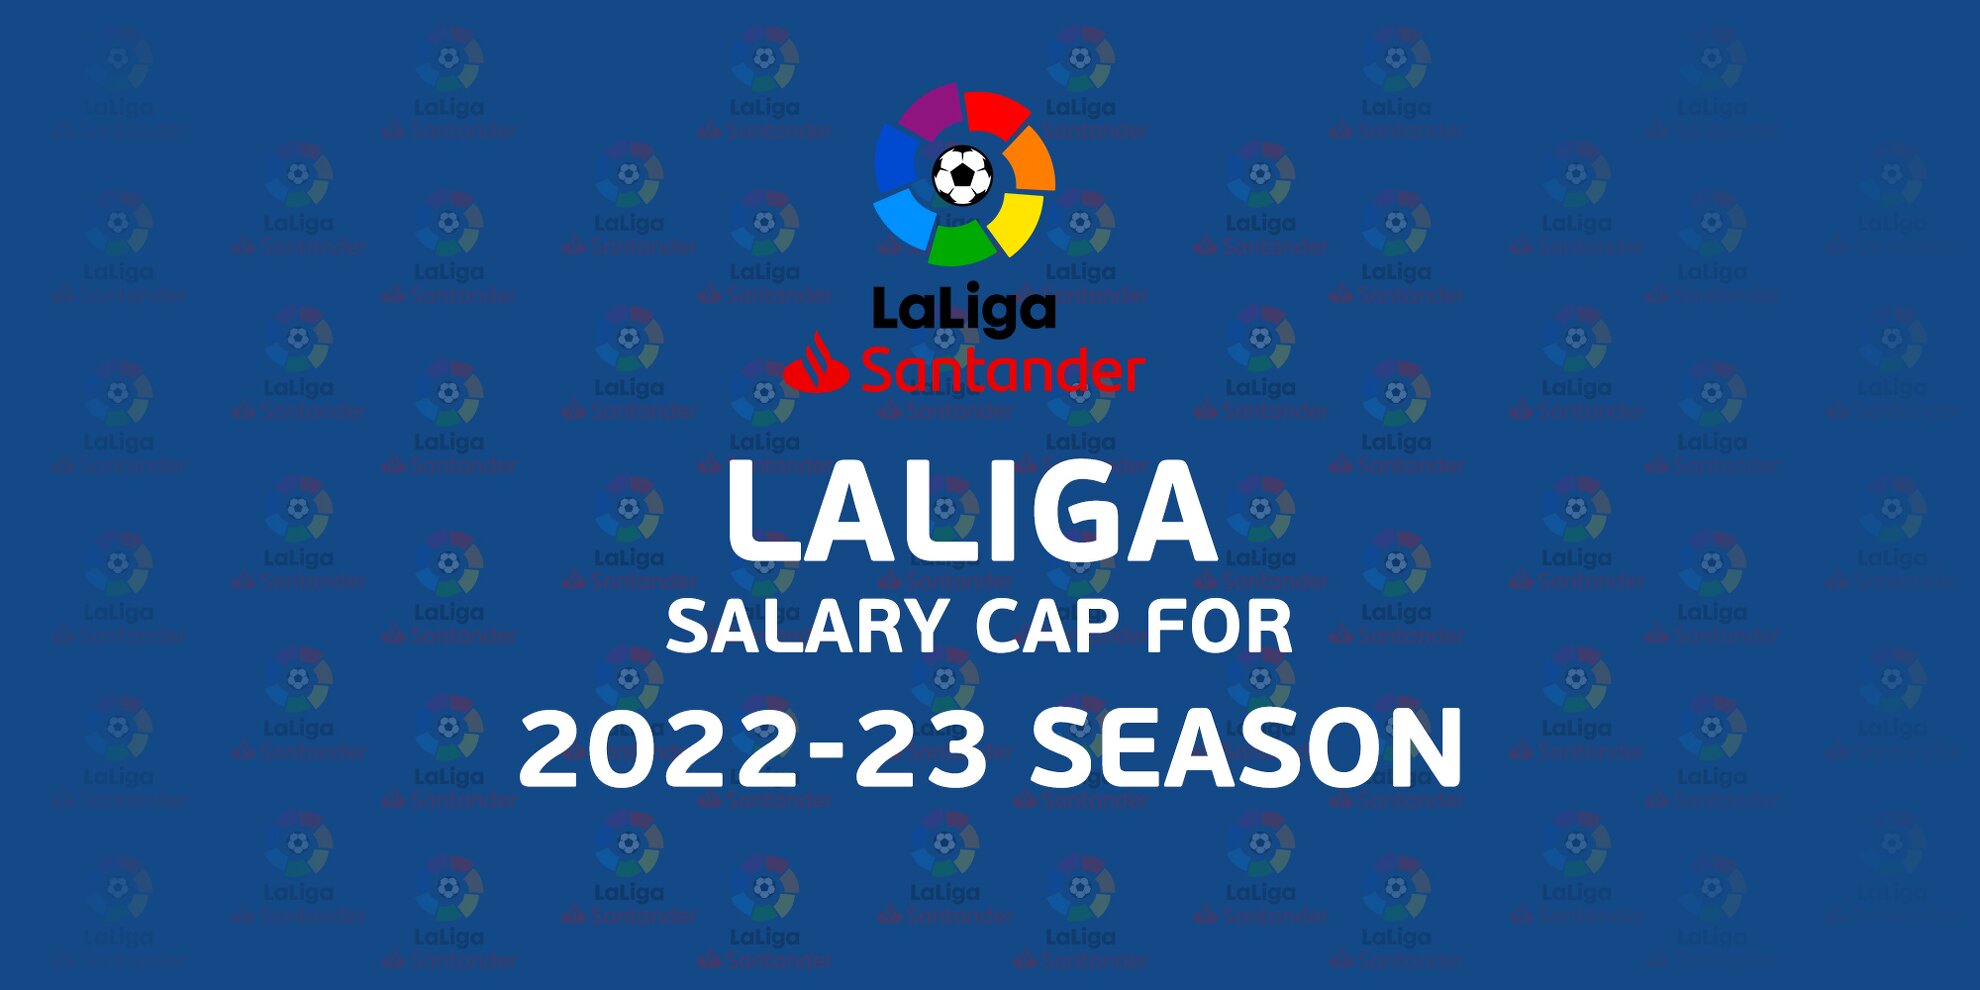 What is the salary cap for every club on LaLiga 2022-23?